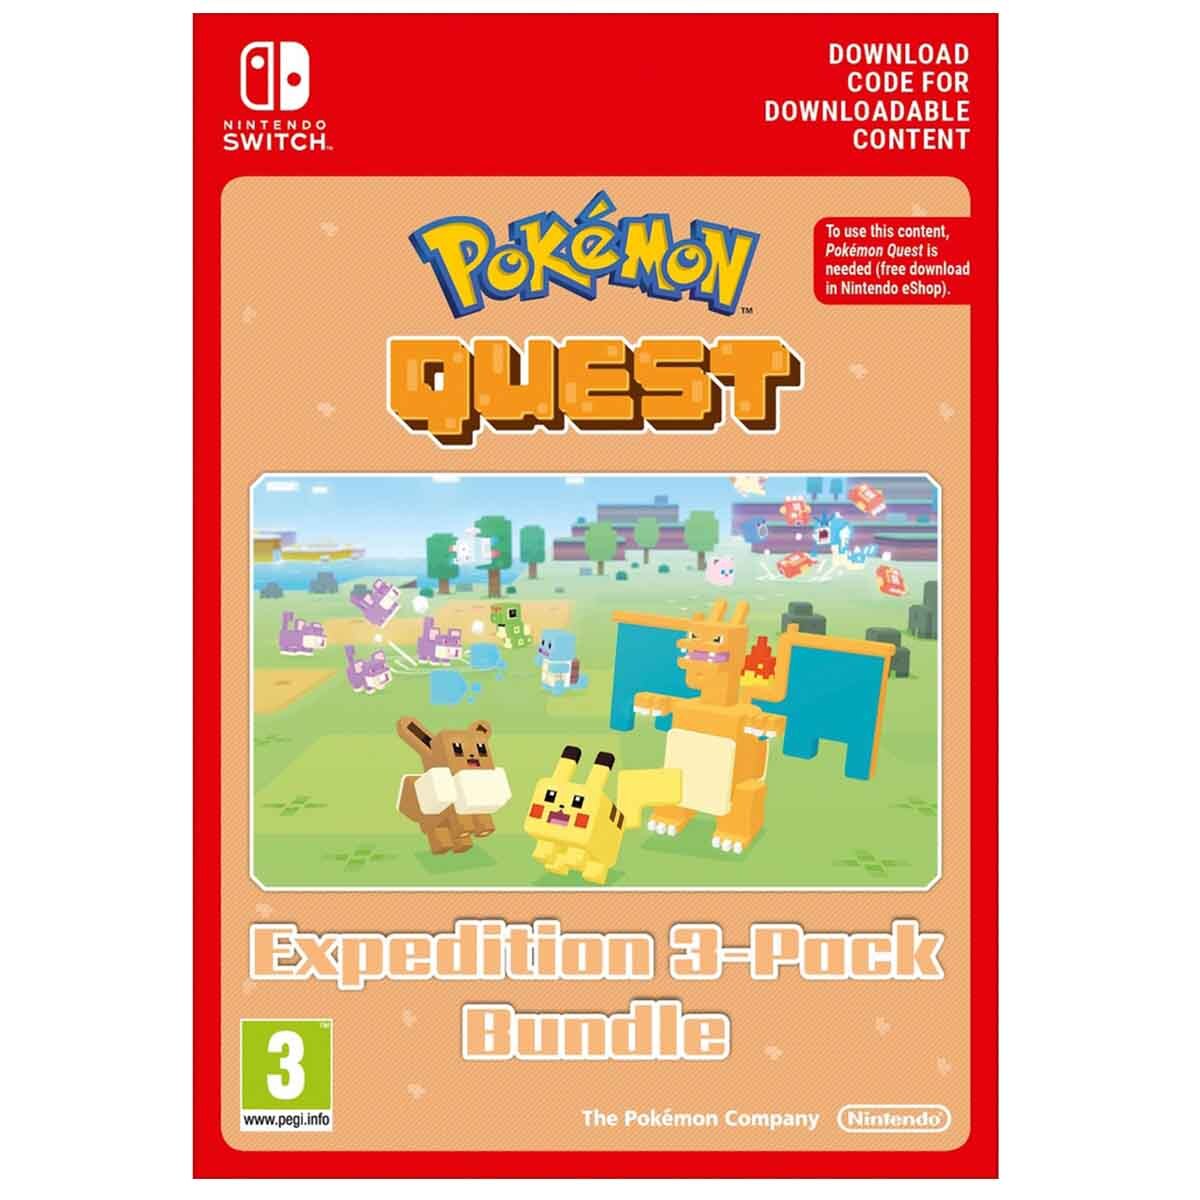 Image of Pokemon QUEST Triple Expedition Pack